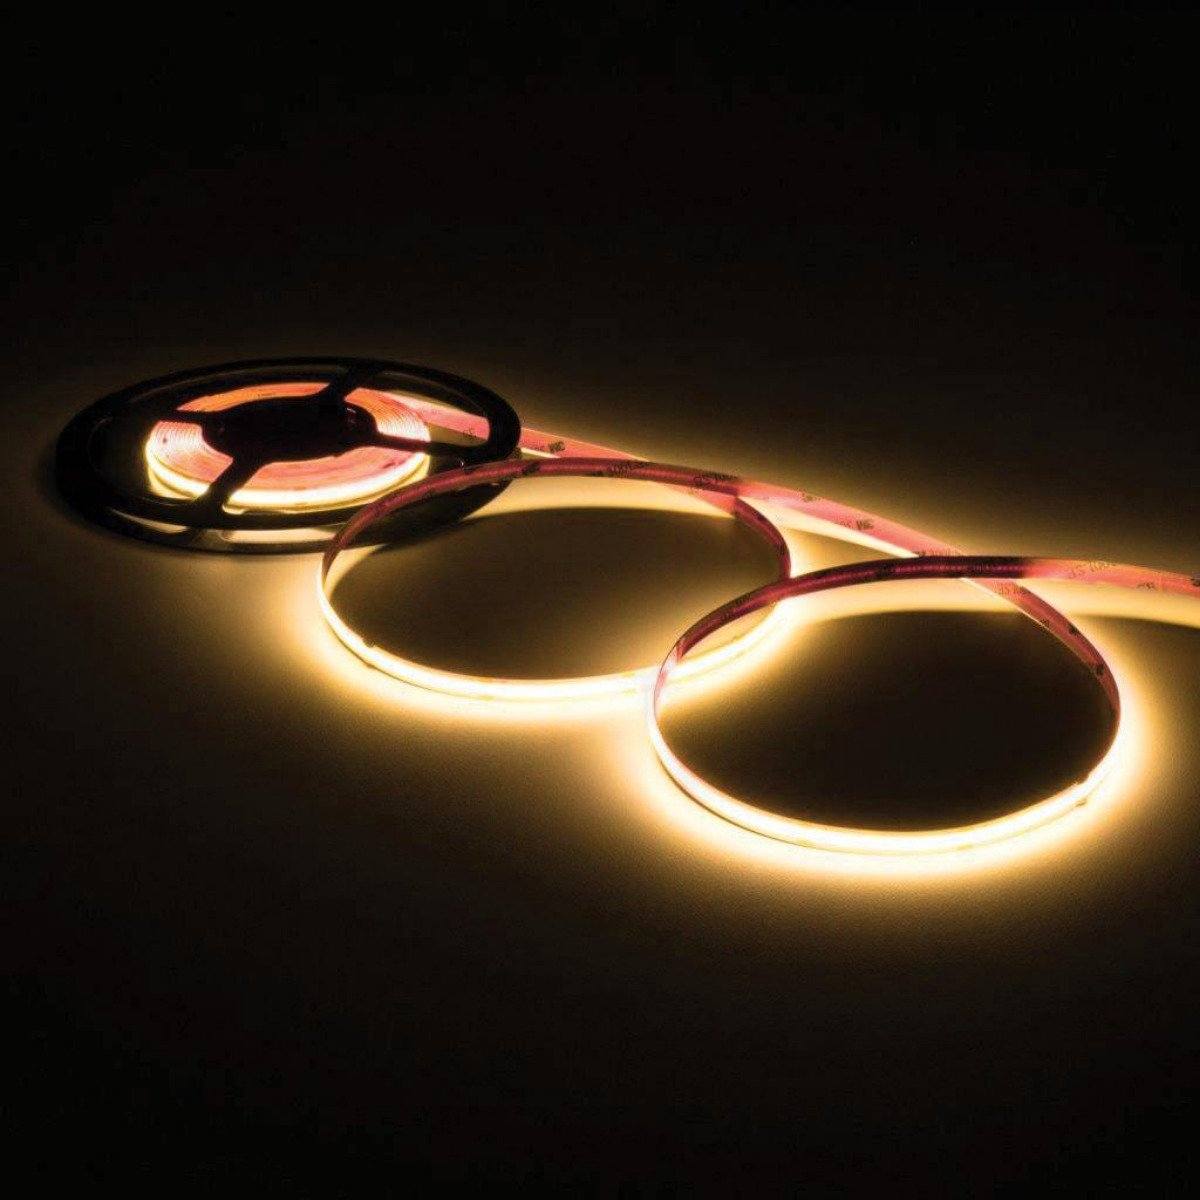 illuminated warm colored led strip light loosely coiled three times off of a black reel